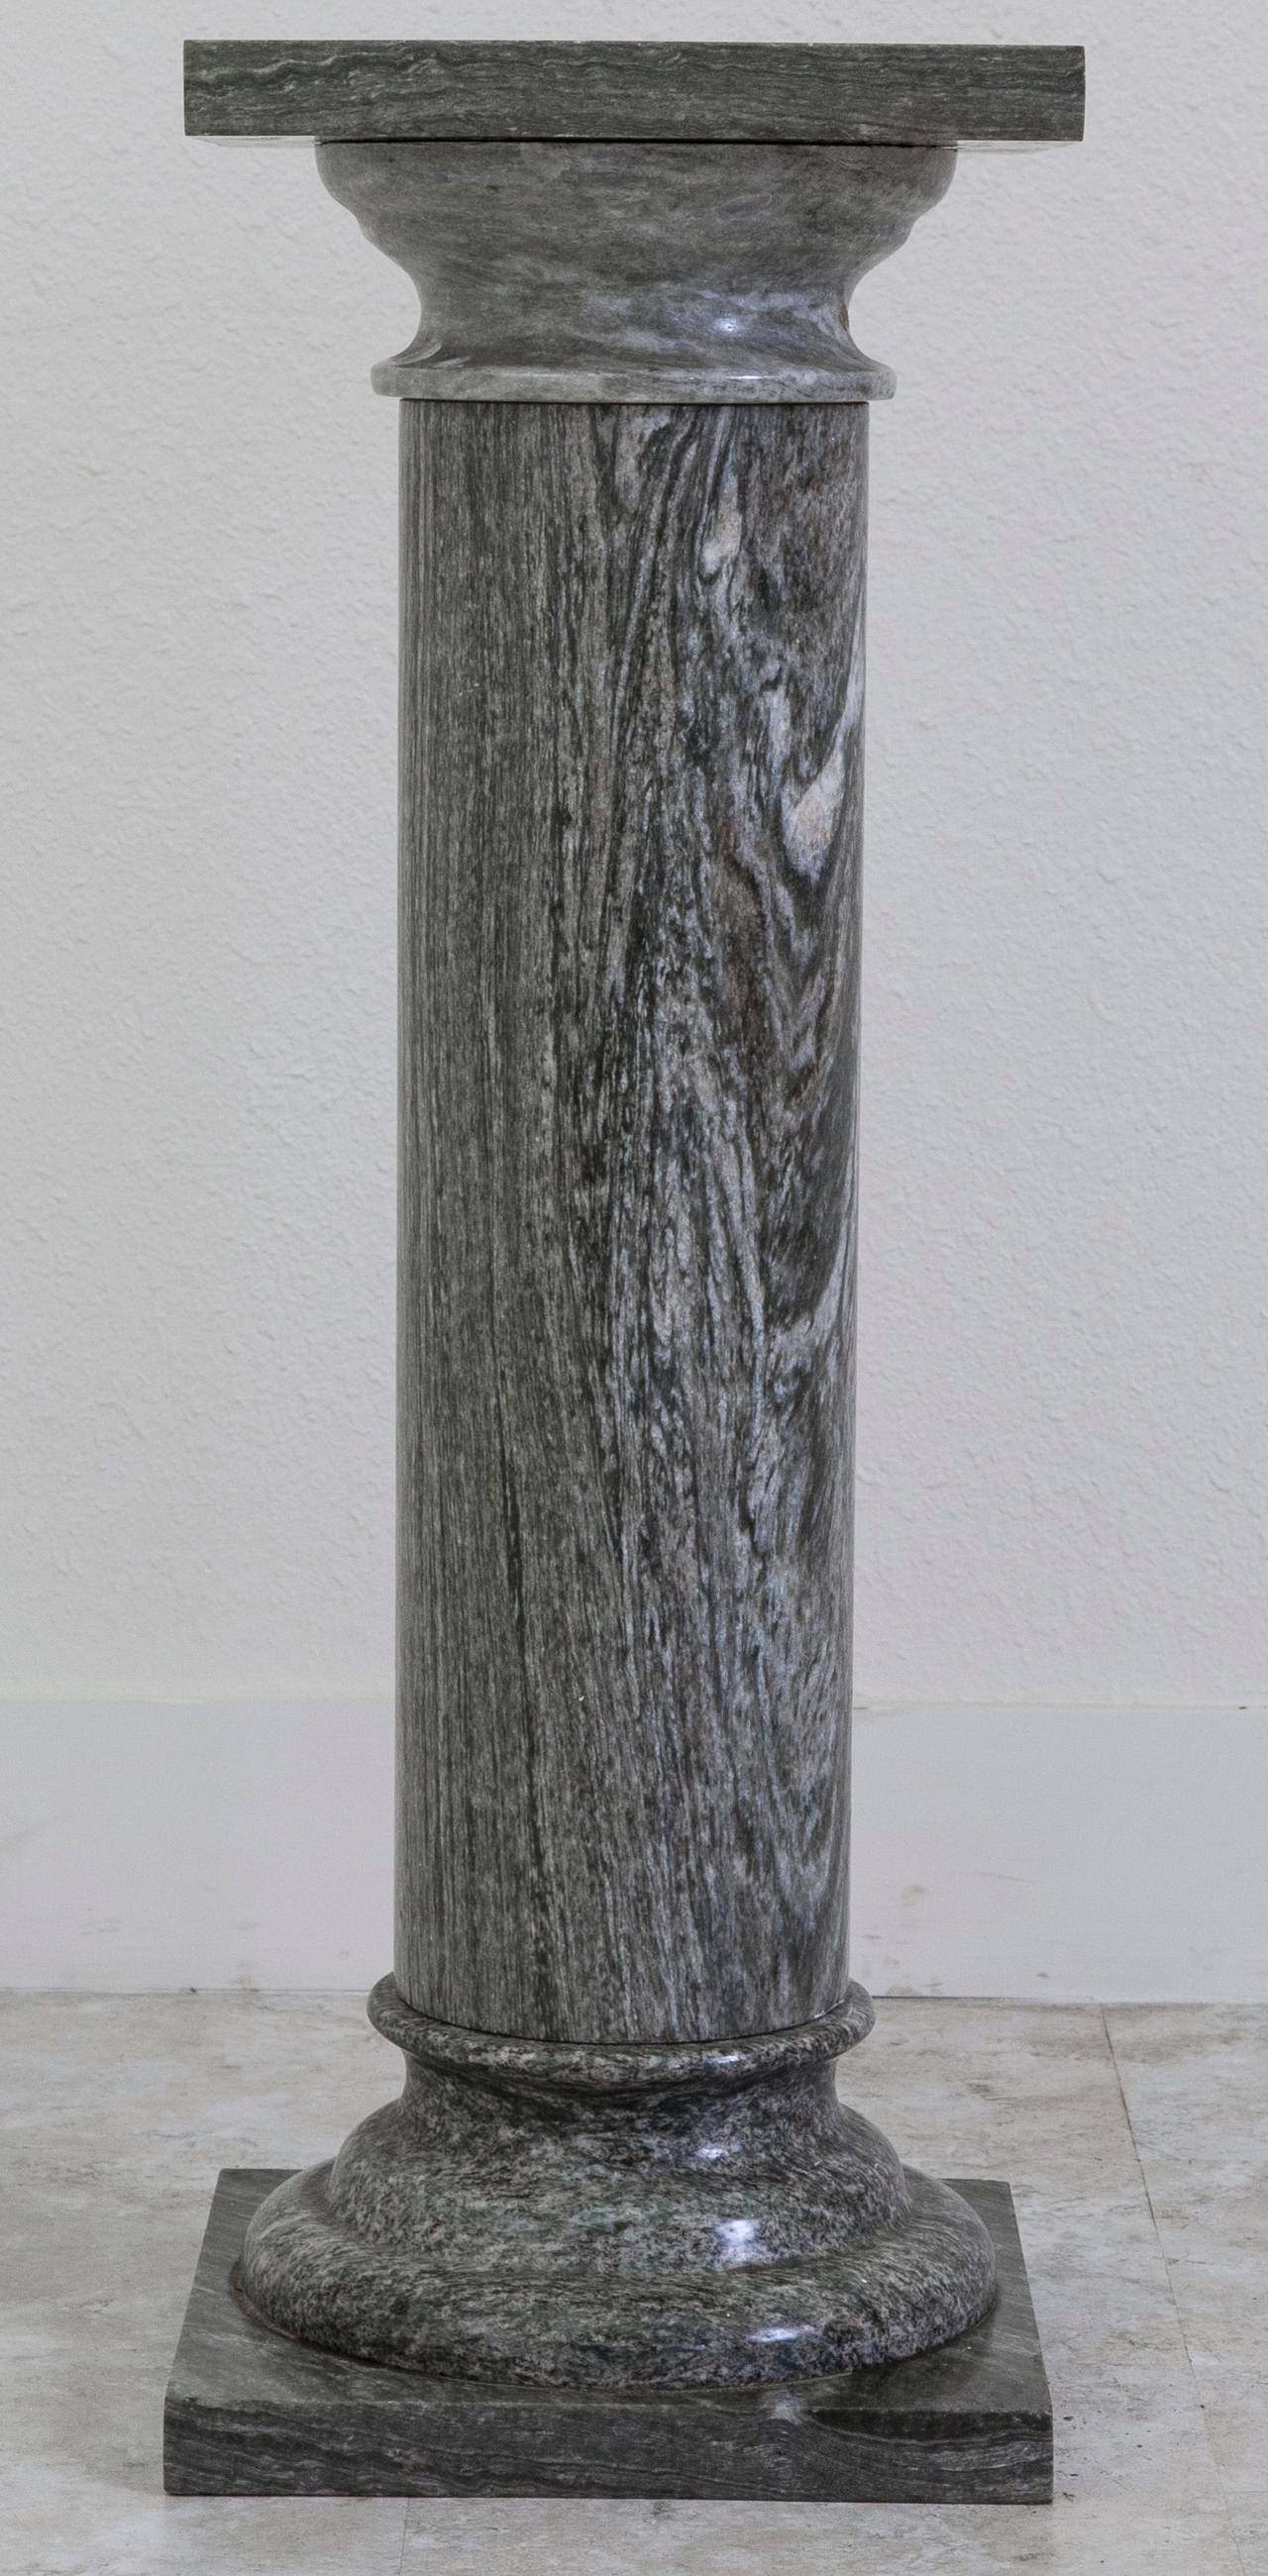 This unusual marble column features veining which resembles the heart grain of wood in highly contrasting tones of gray. At 13